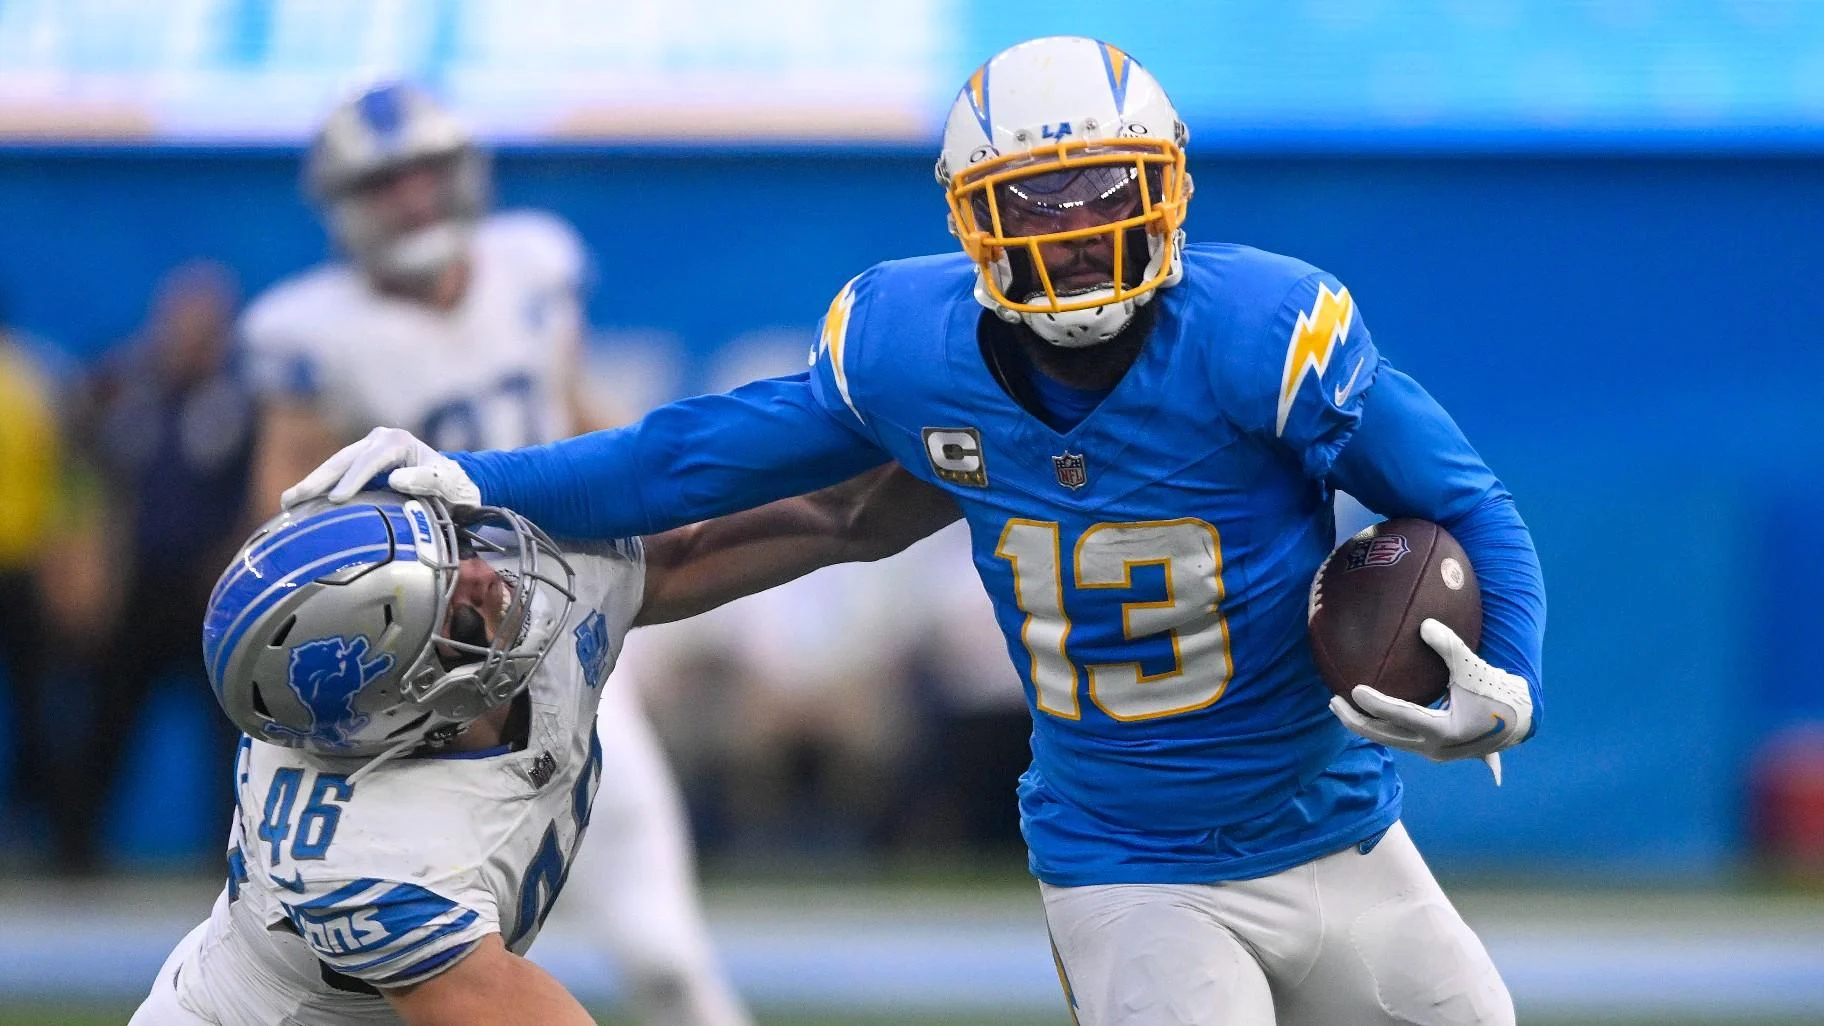 NFL Offseason Shocker How Keenan Allen's Surprise Trade to the Bears Changes the Game---